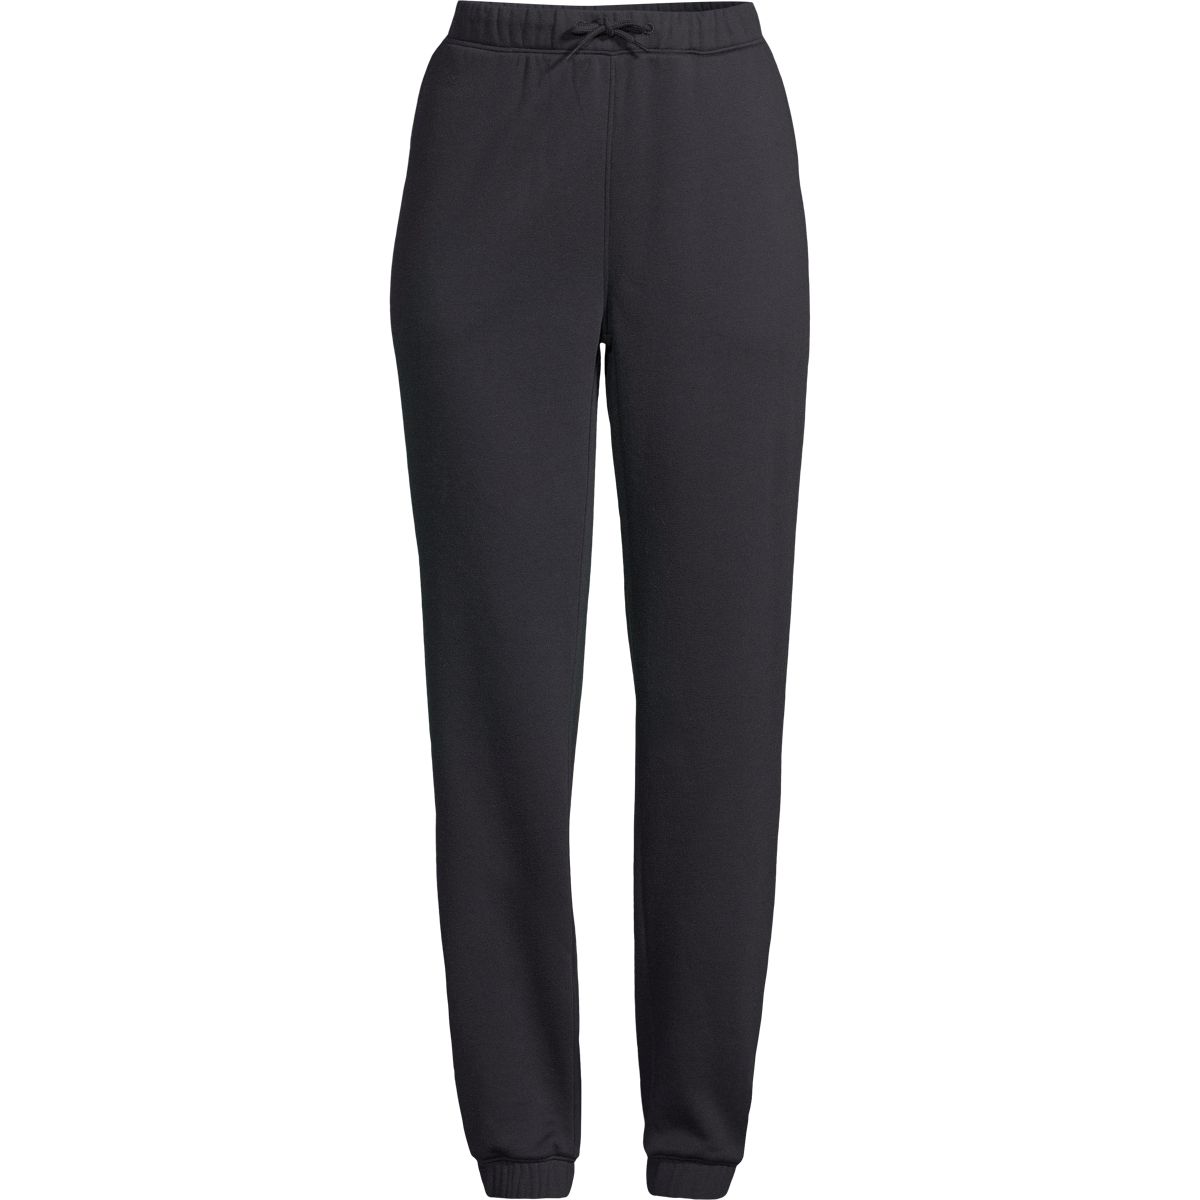 Ripzone Women's Mara French Terry Joggers, Sweatpants, Casual